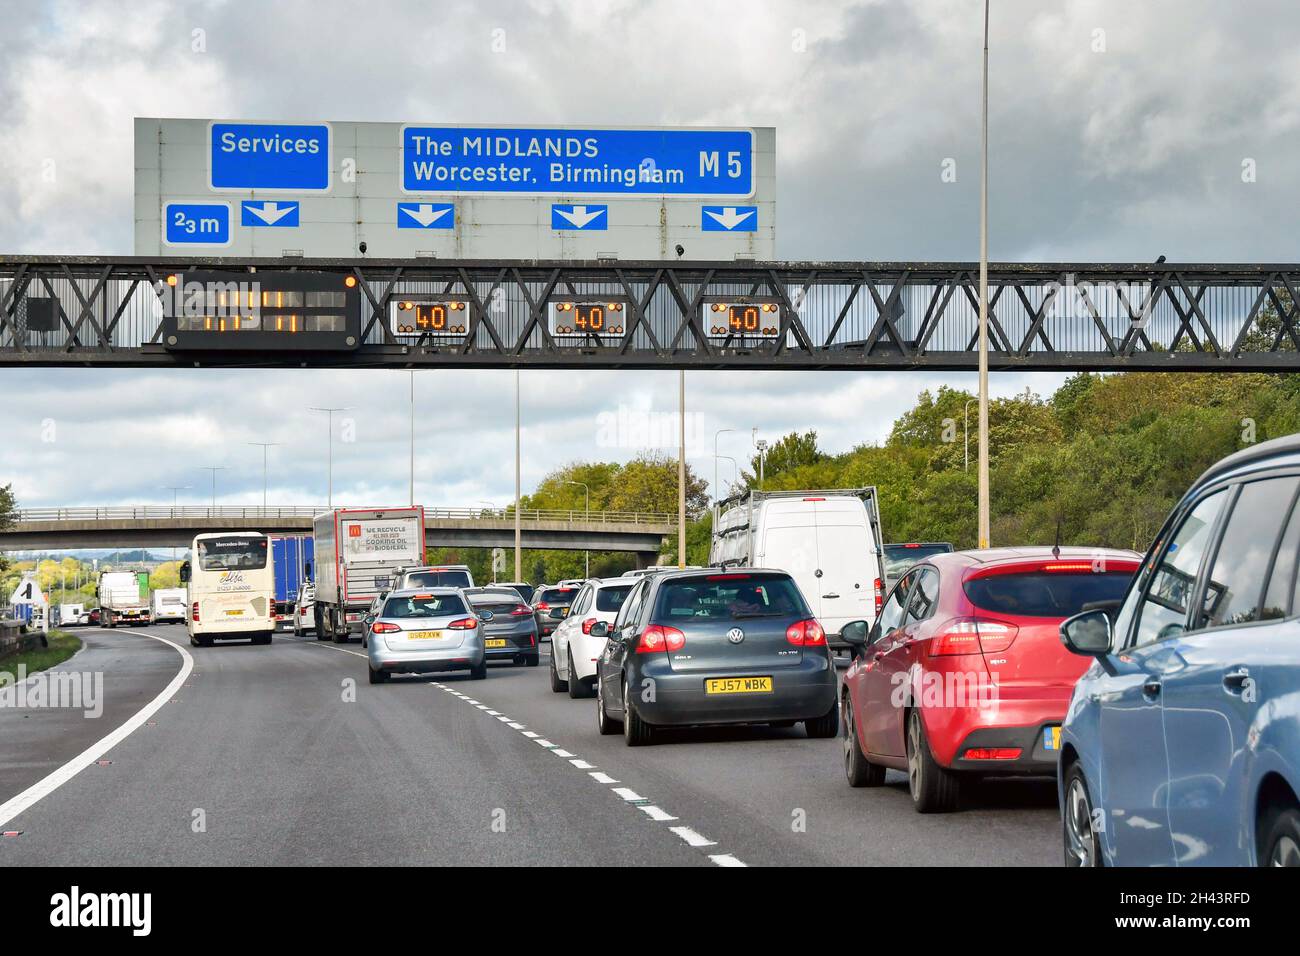 Strensham, England - October 2021: Traffic congestion from traffic queuing on the M5 motorway Stock Photo